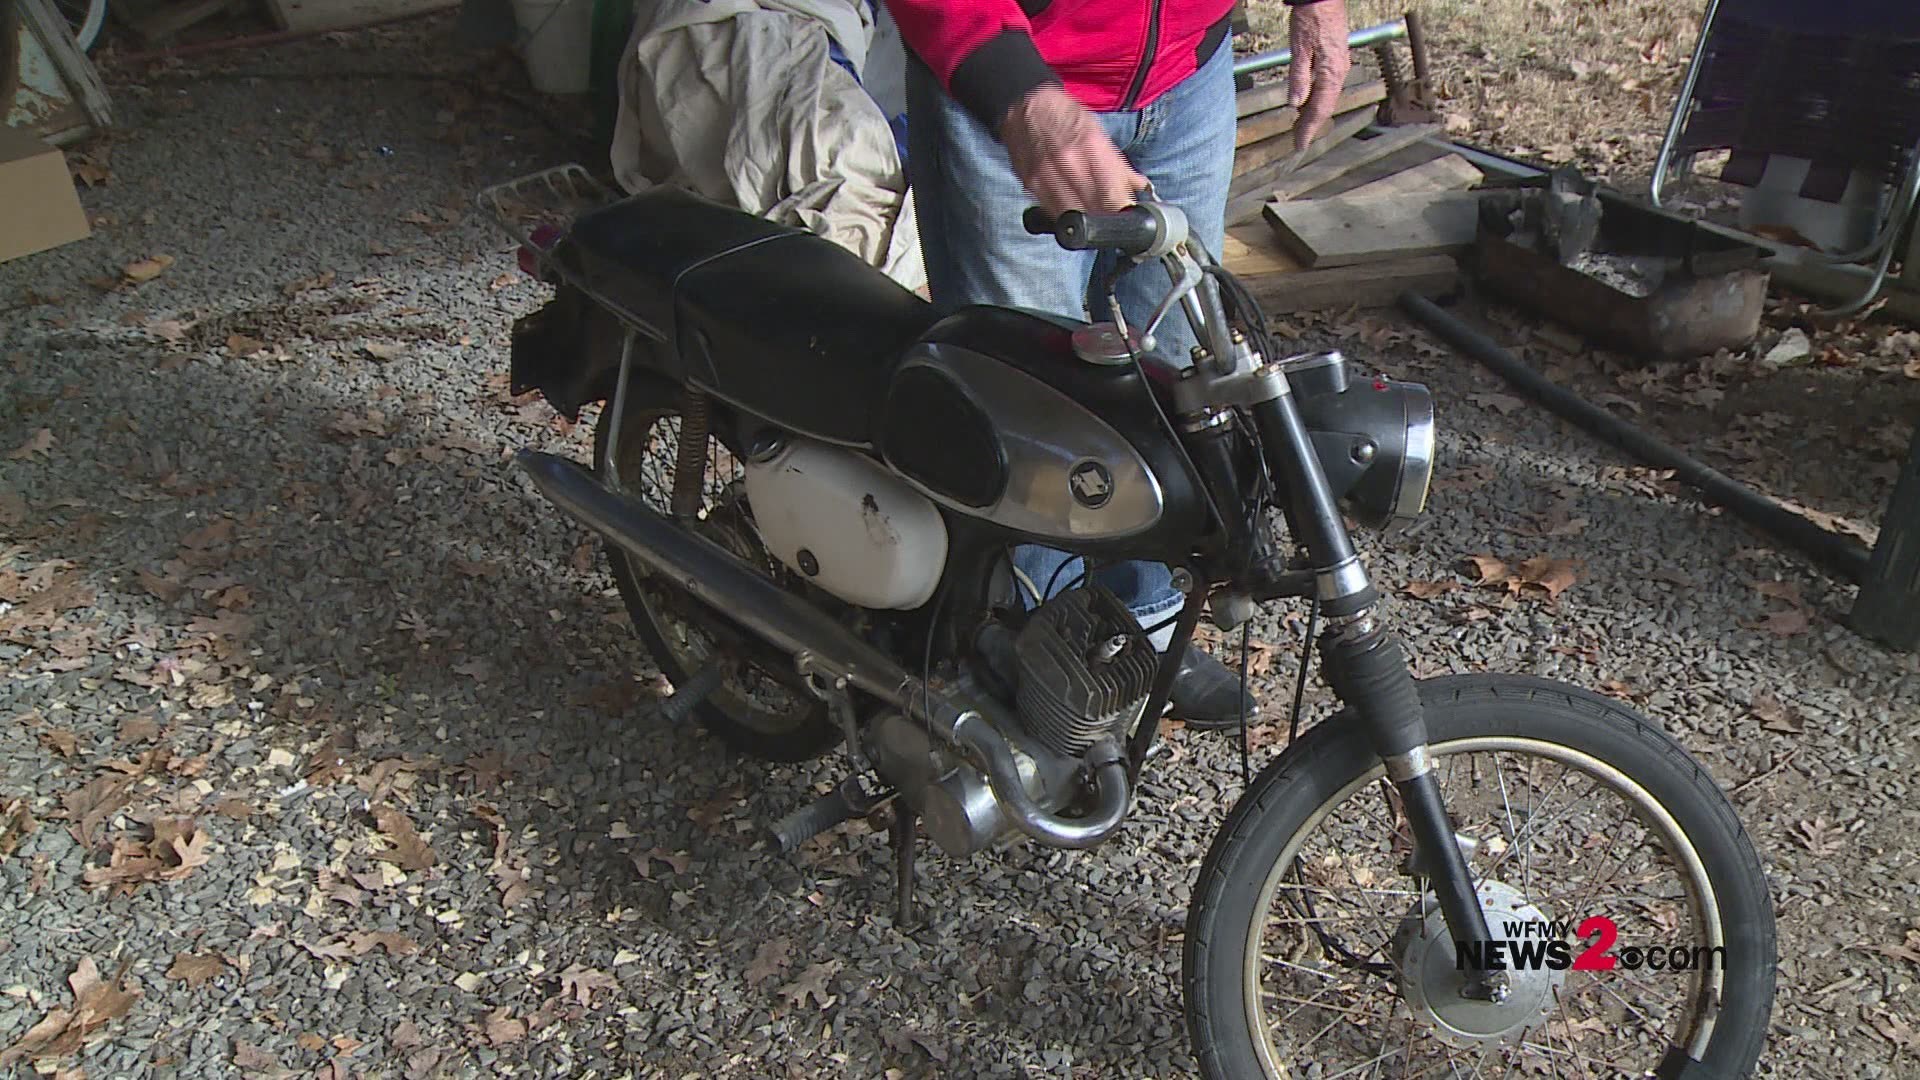 After nearly 50 years Steve Suggs' family reunites him with the motorcycle he had in the military. Suggs said he was speechless after seeing his Christmas Gift.